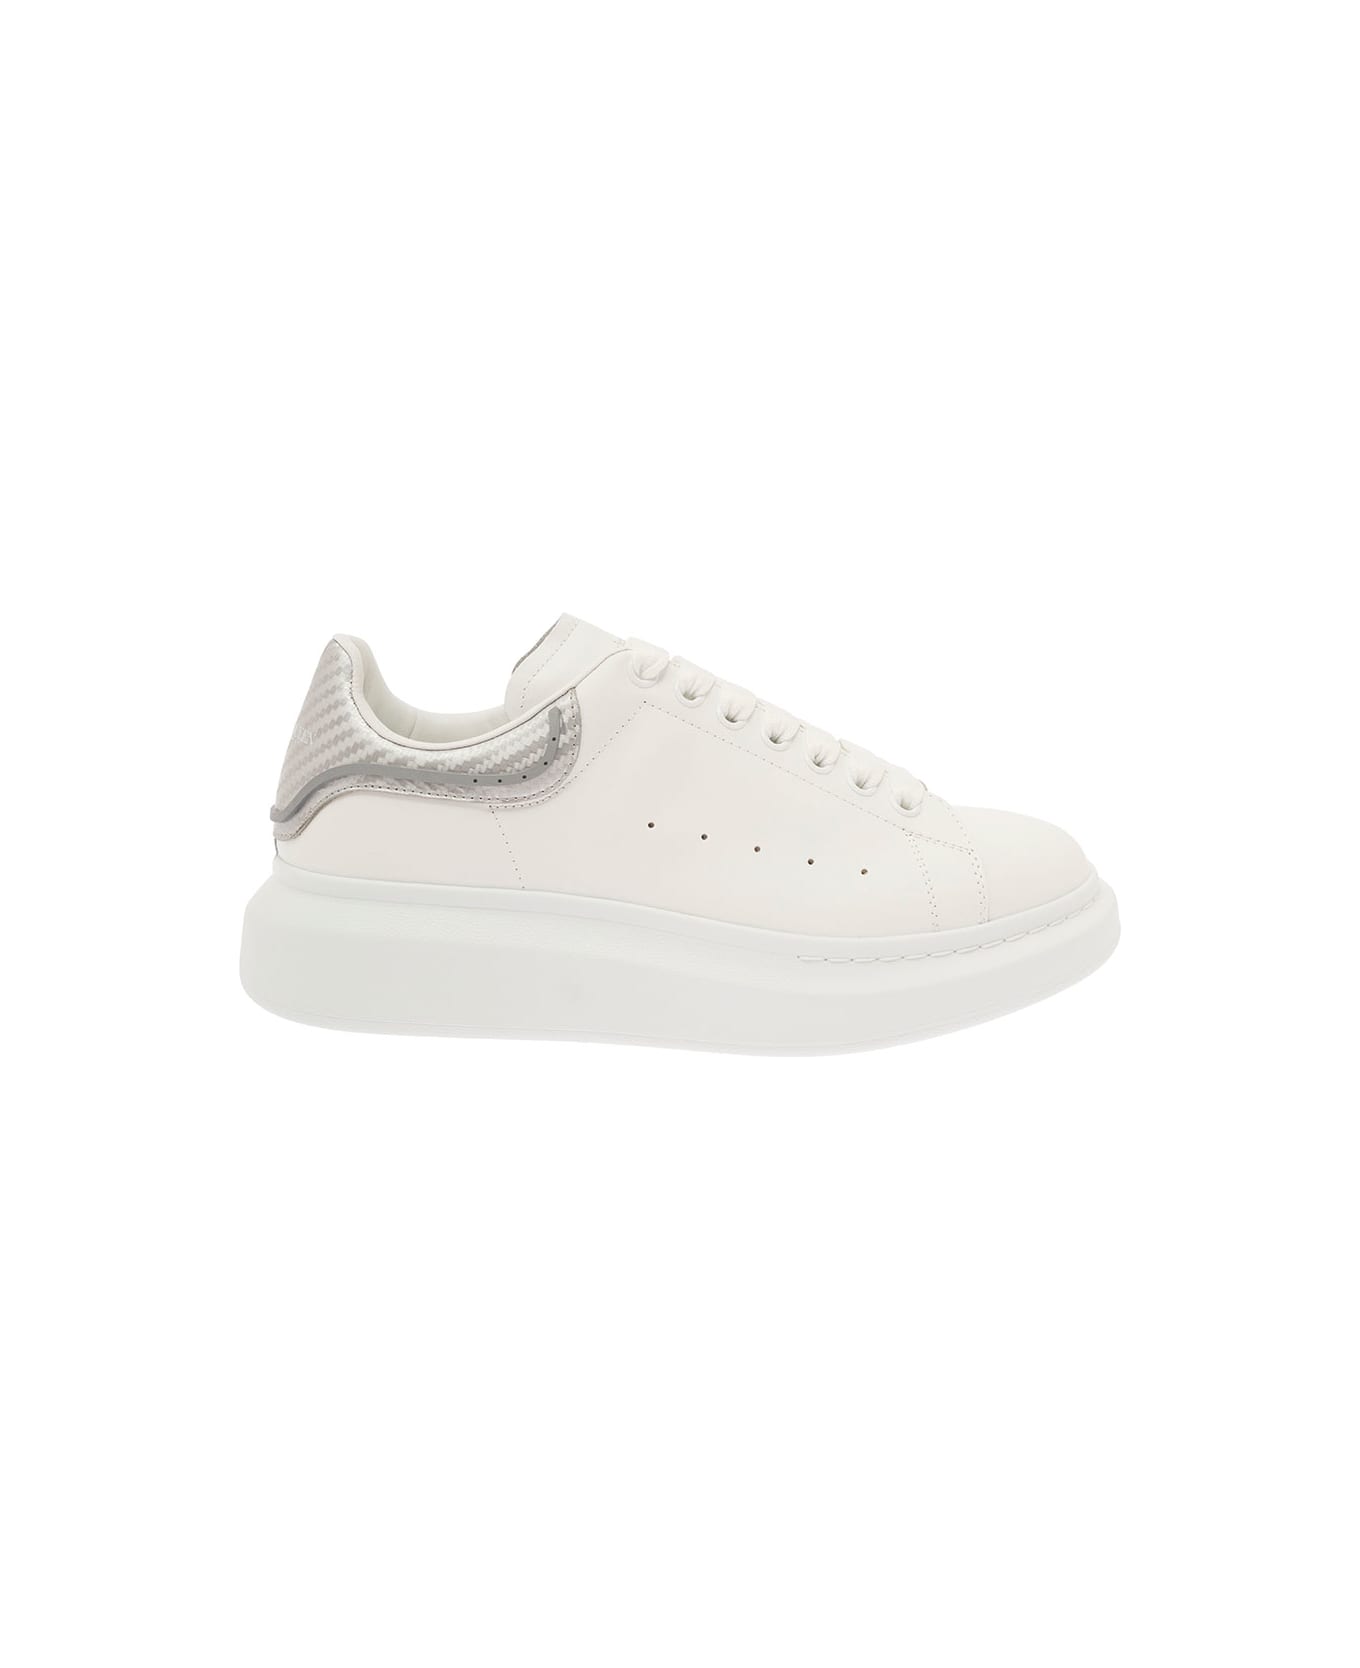 Alexander McQueen White Sneakers With Metallic Heel Tab In Leather Man - White